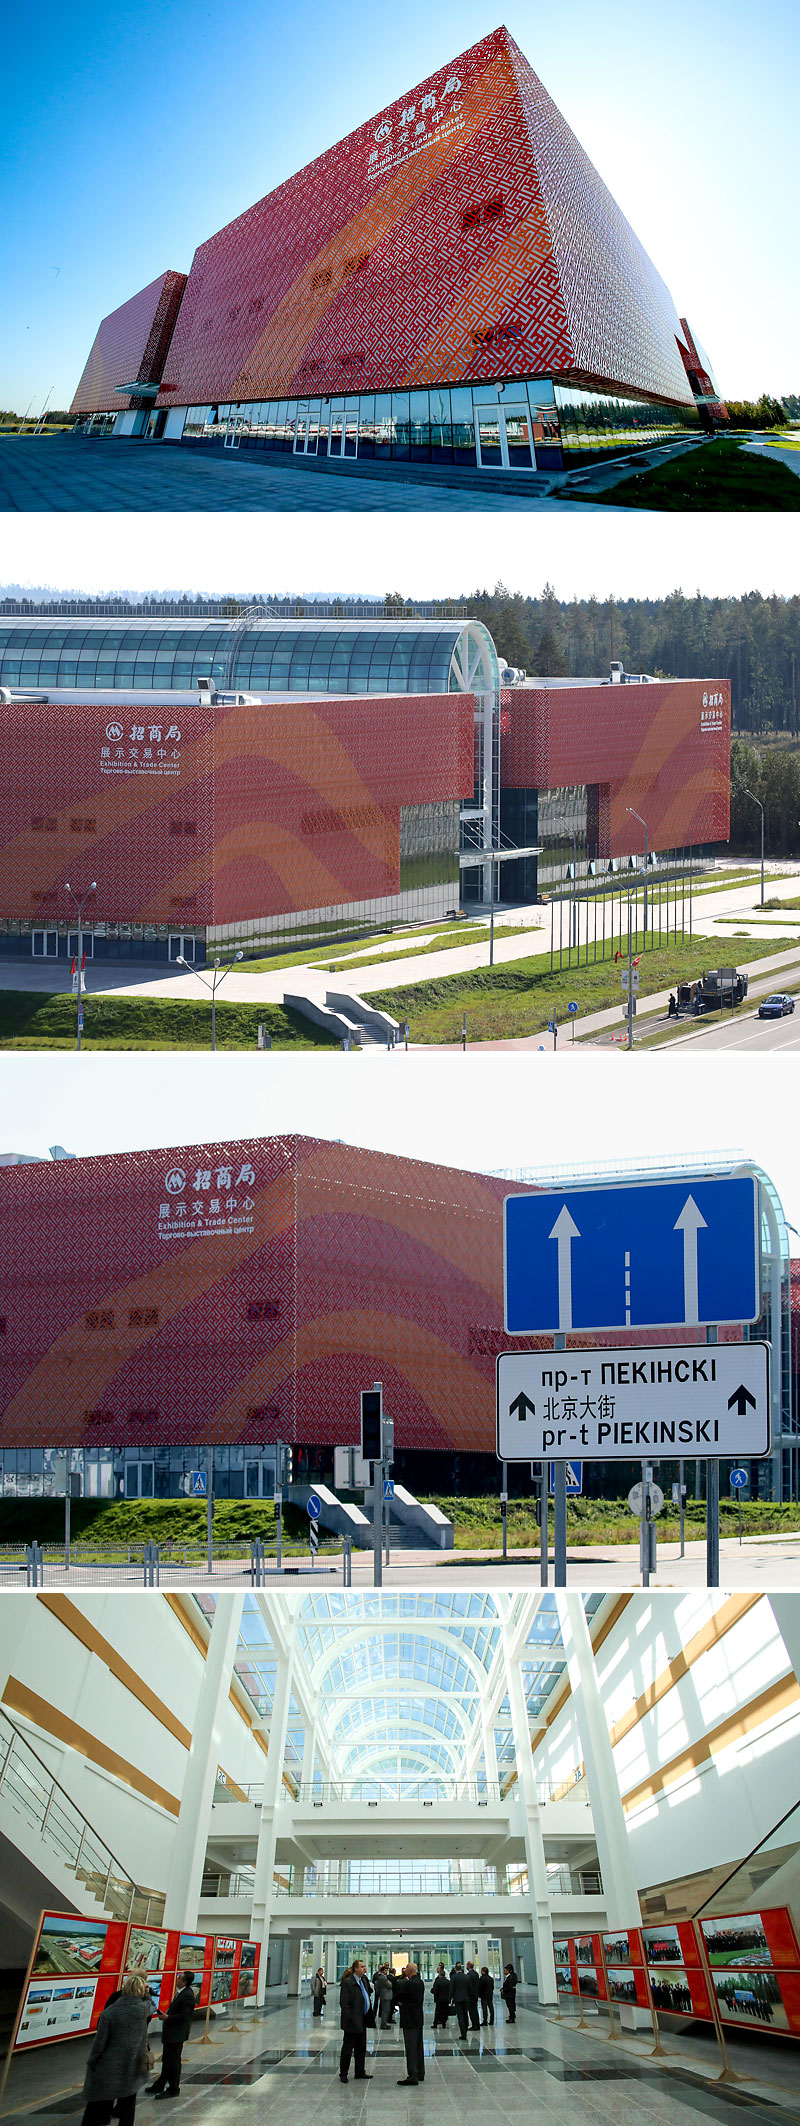 Exhibition center of China Merchants CHN-BLR Commerce and Logistics Company